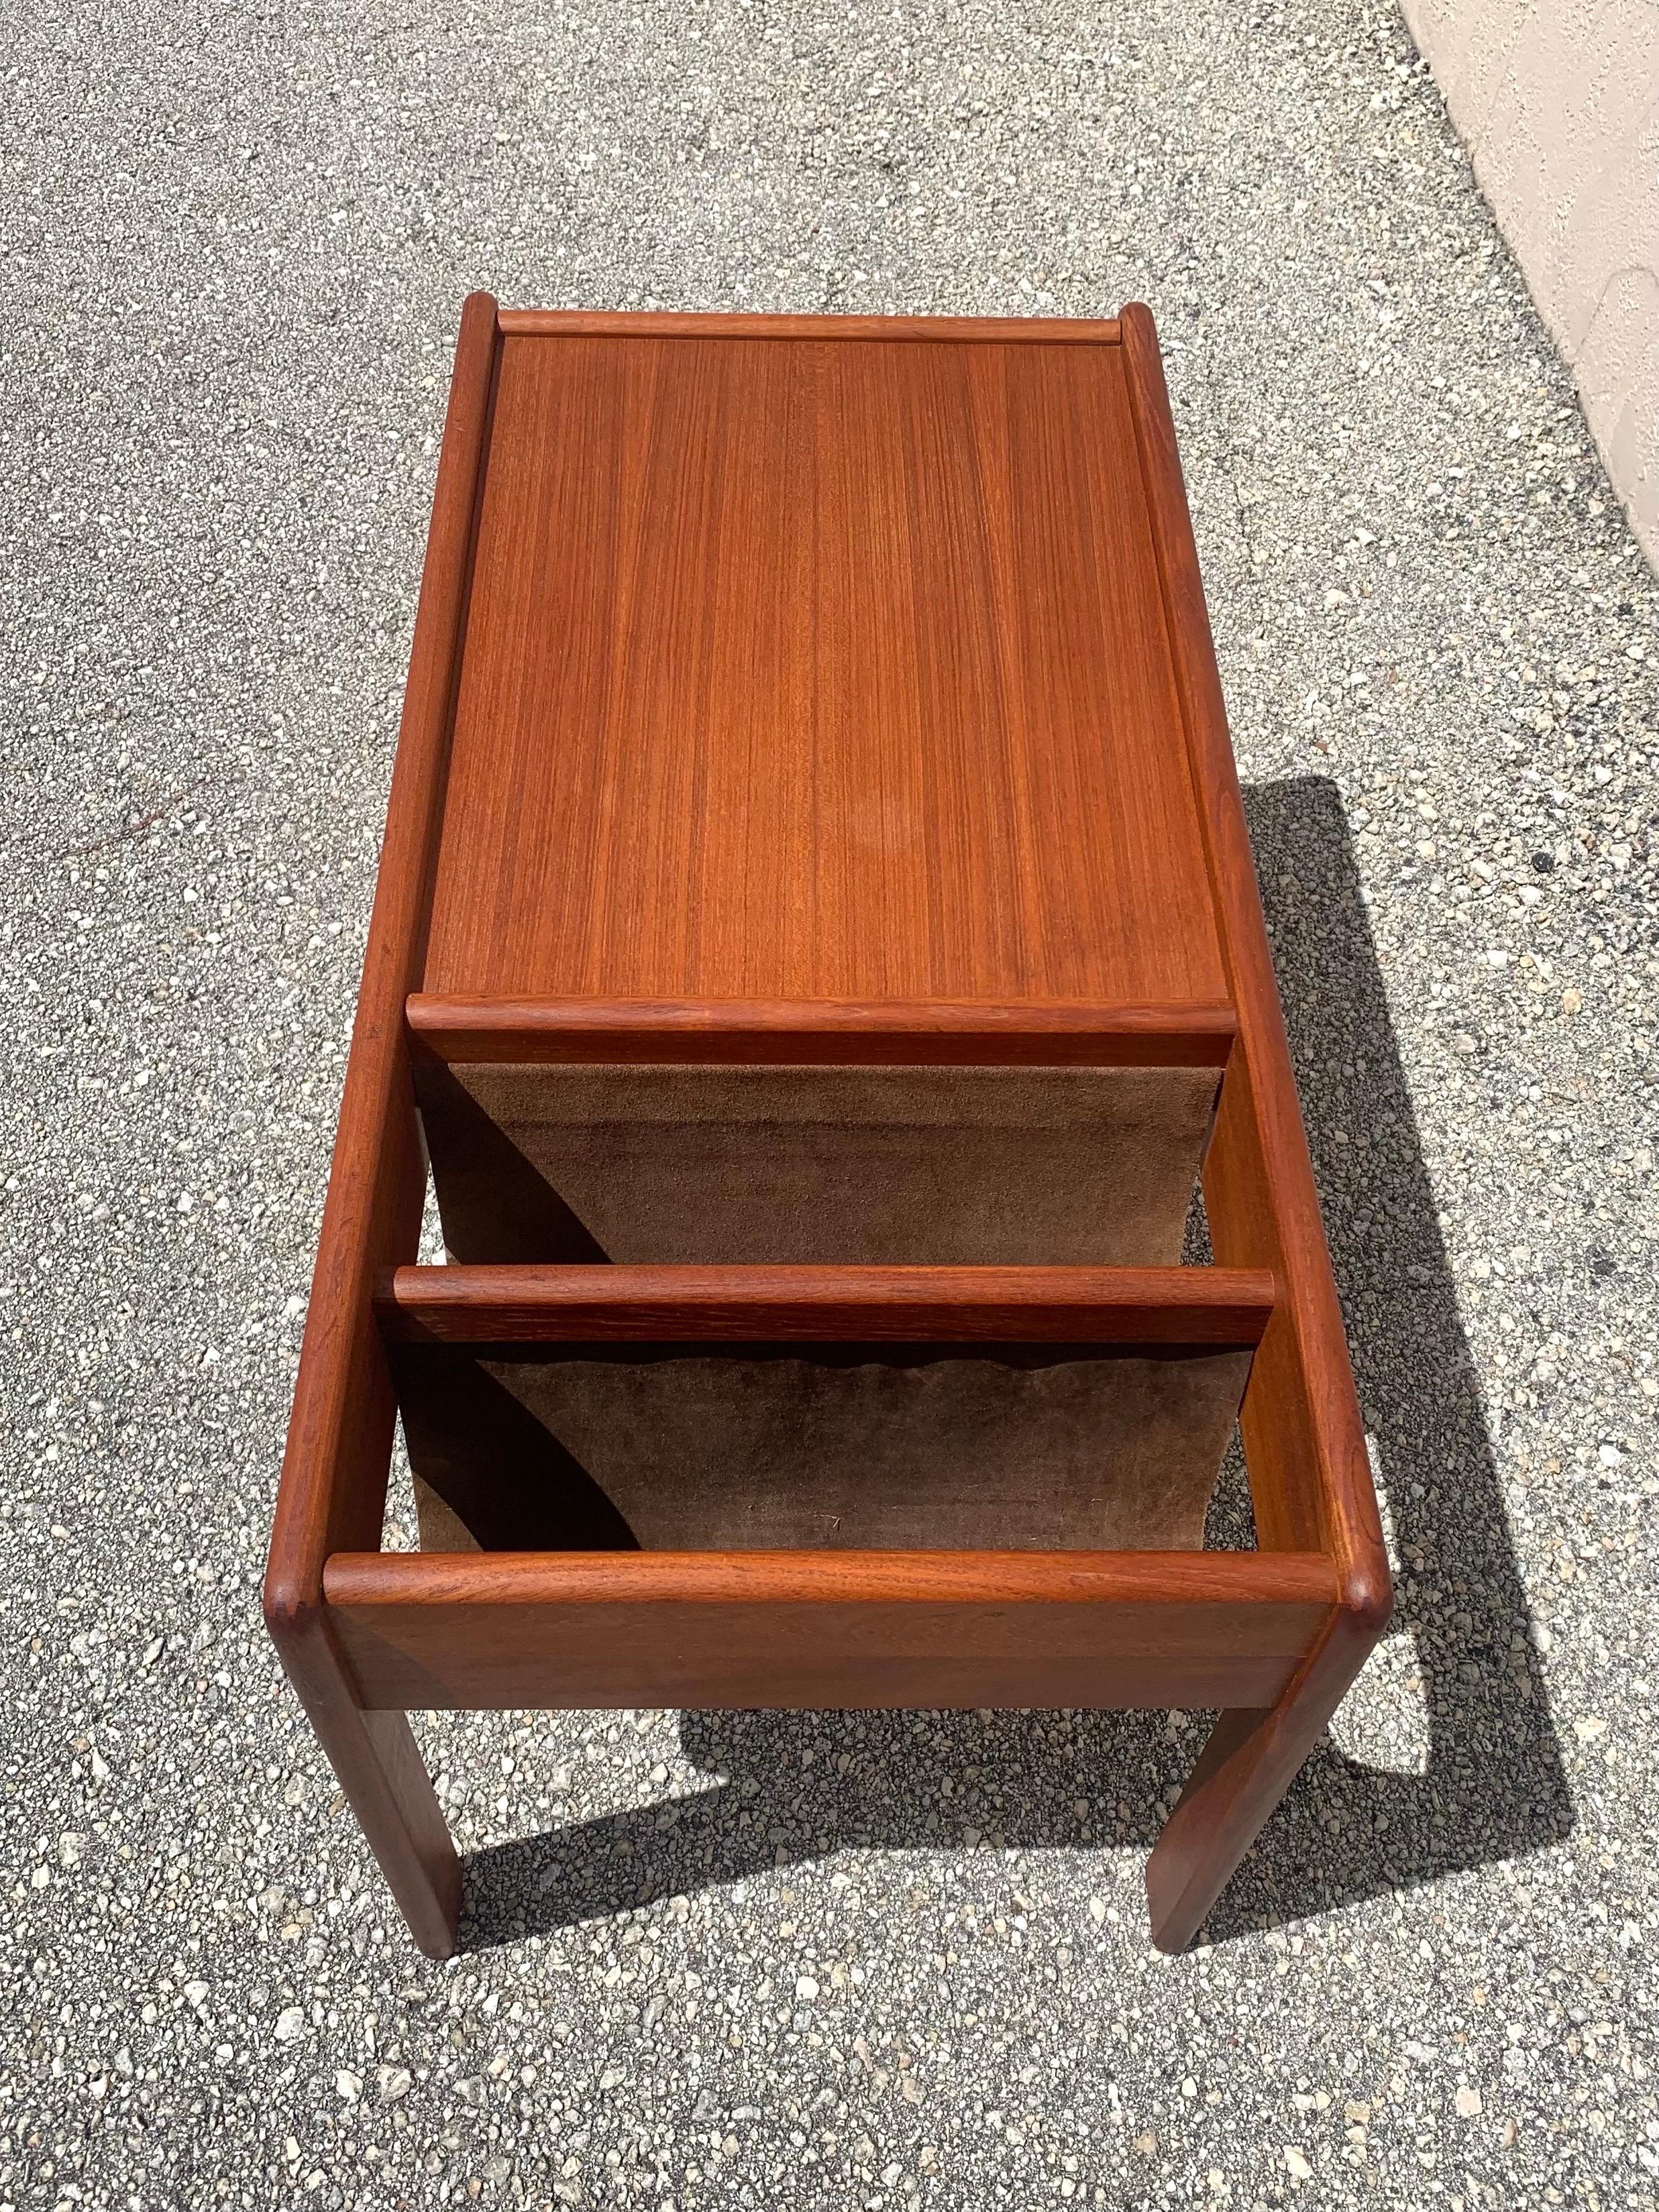 Mid Century Danish Teak Coffee Table with Suede Magazine Holder In Good Condition For Sale In Boynton Beach, FL